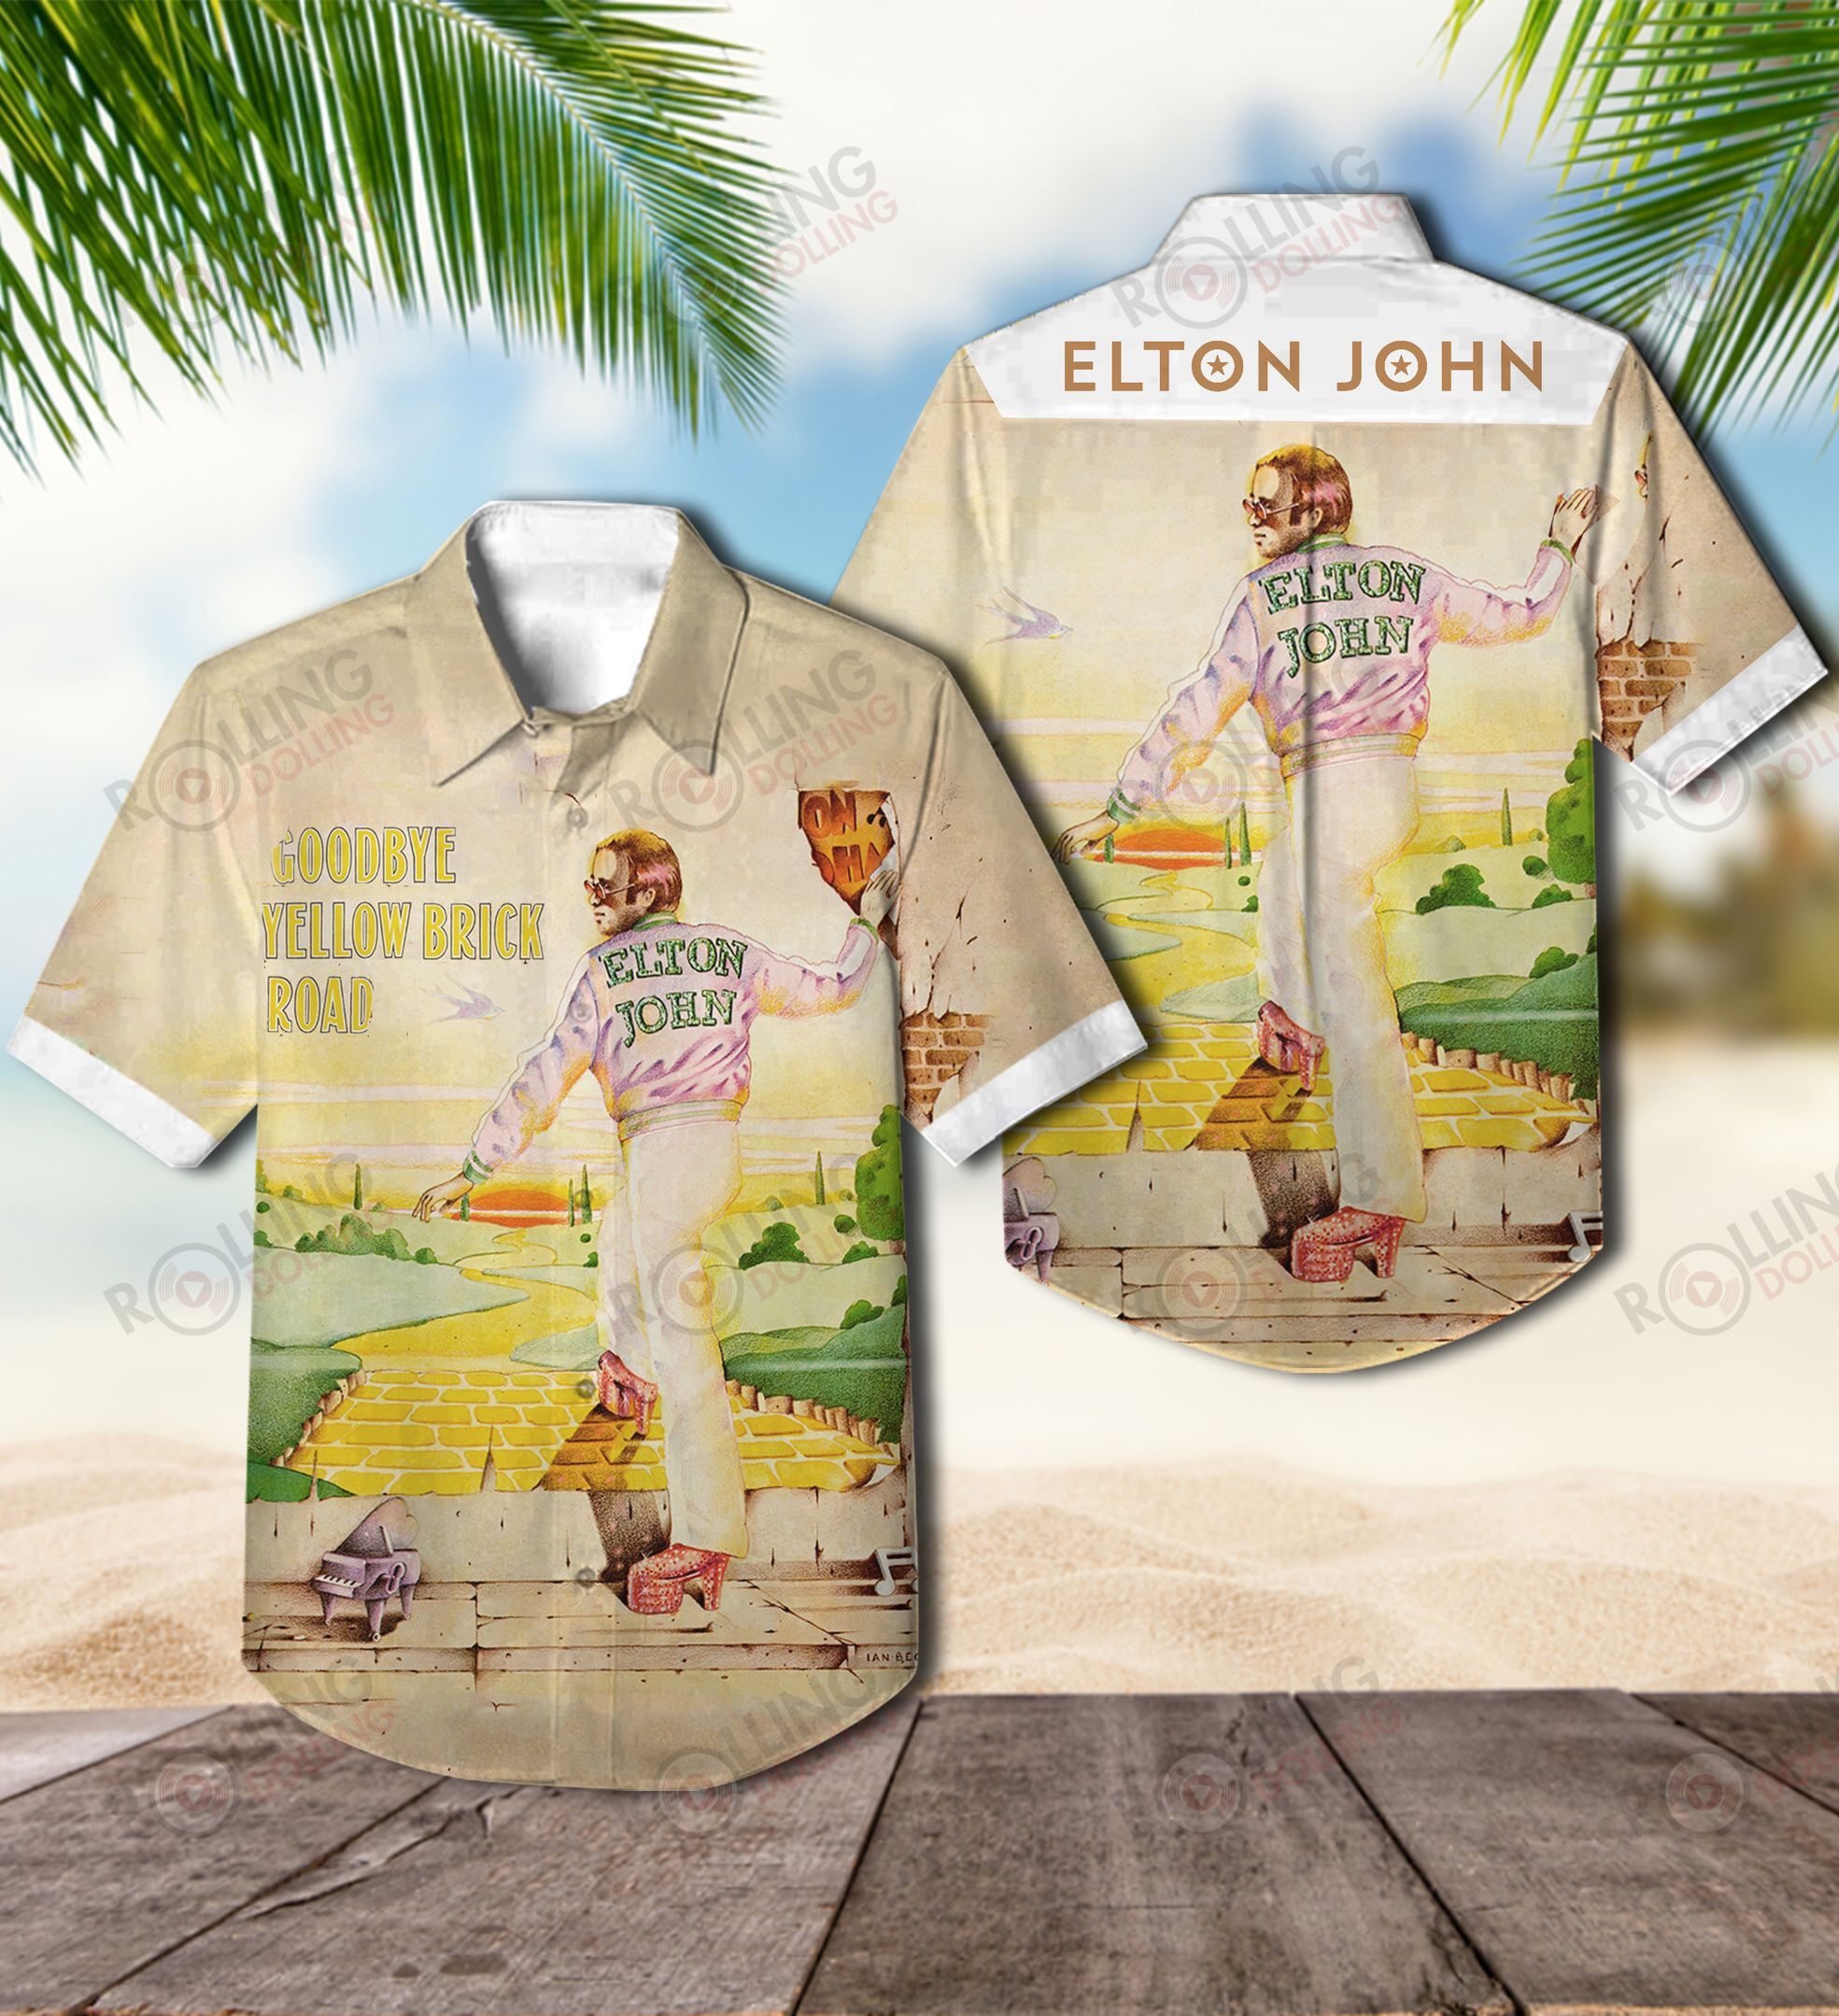 You'll have the perfect vacation outfit with this Hawaiian shirt 95